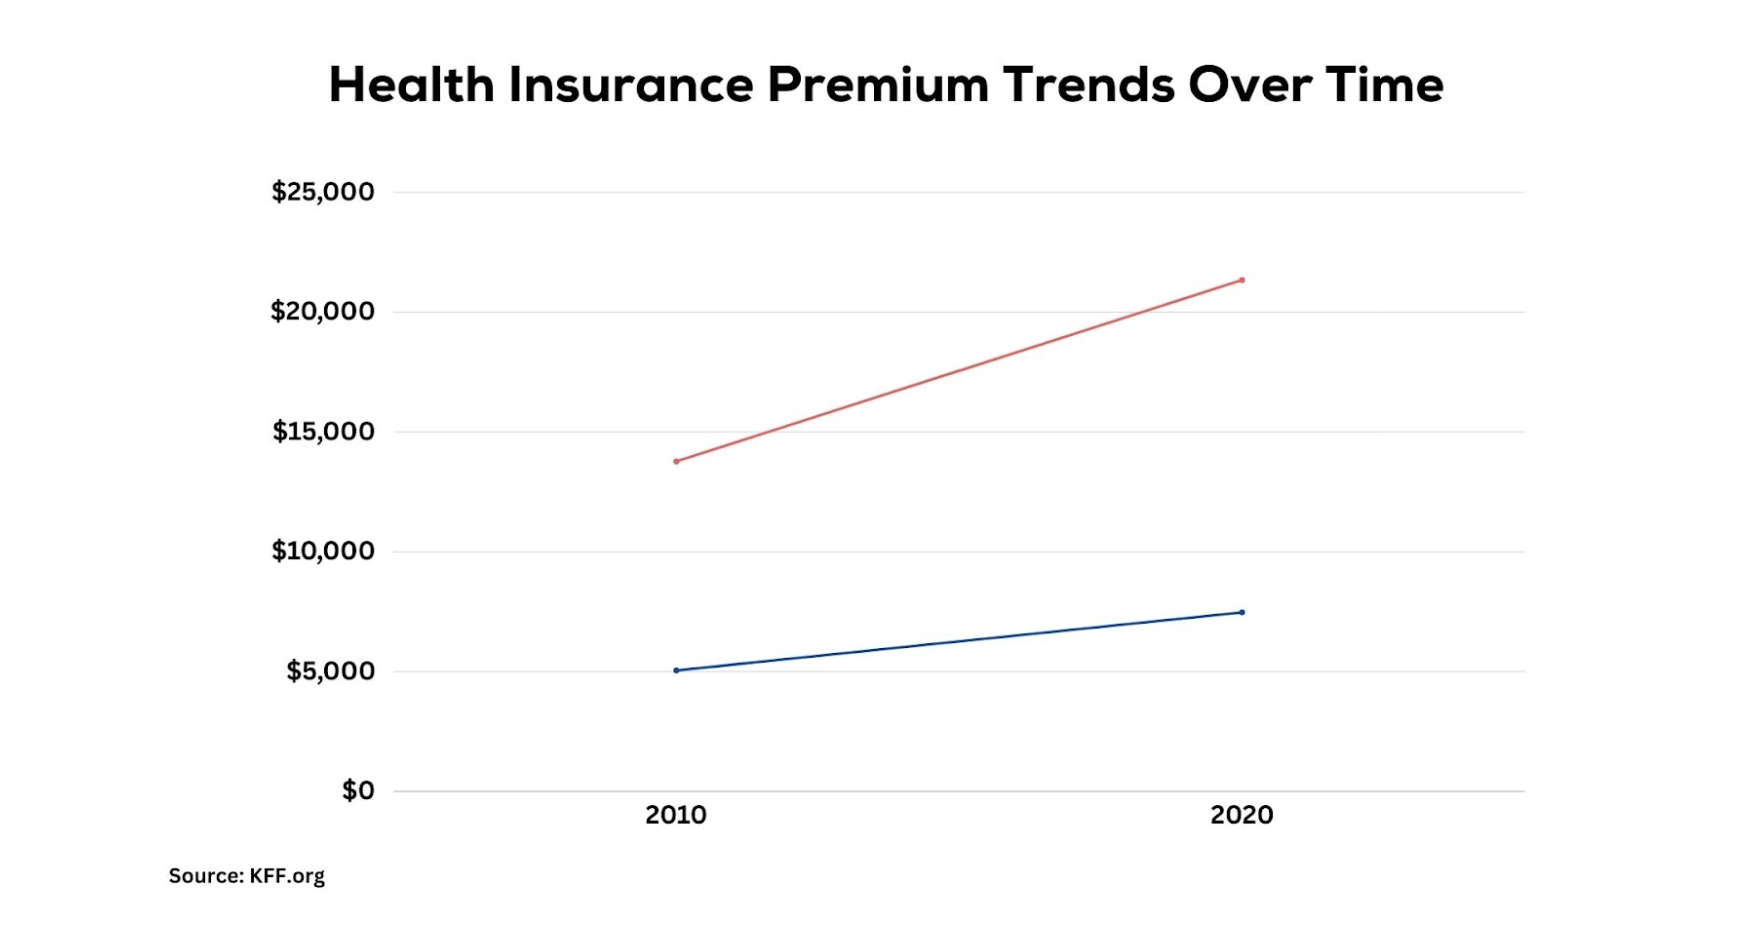 Health Insurance Premium Trends Over Time